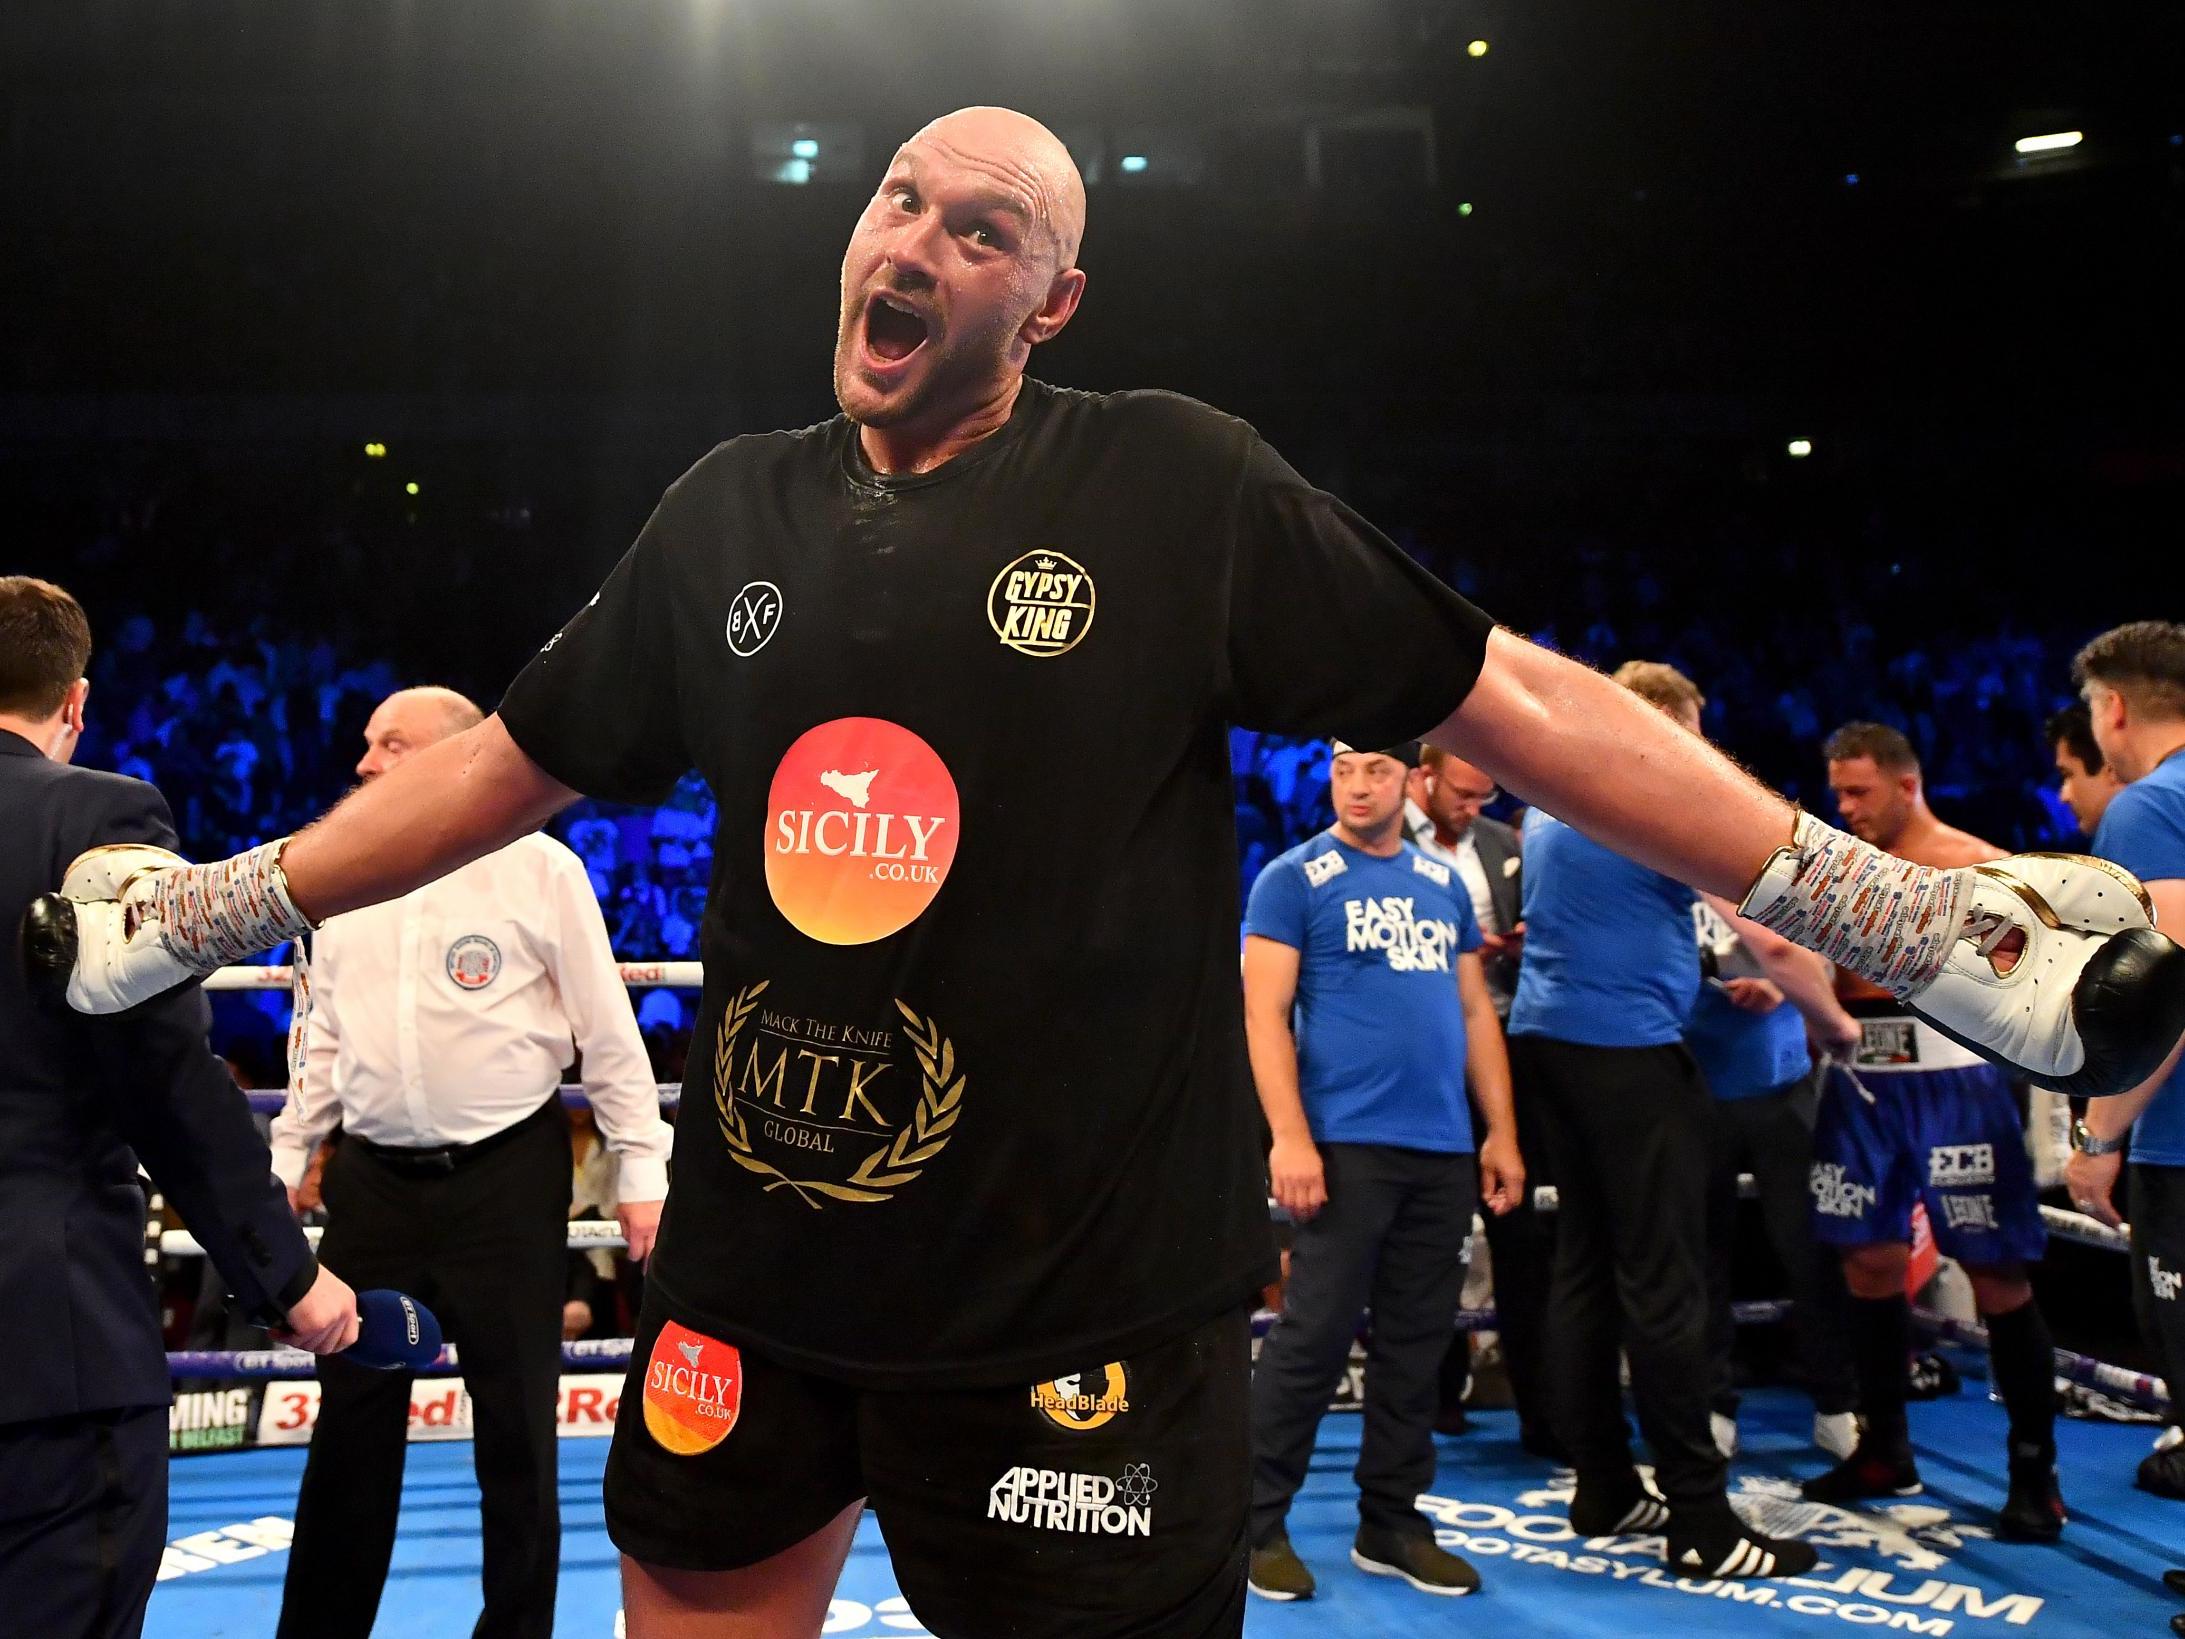 Tyson Fury's next fight comes in August against Francesco Pianeta